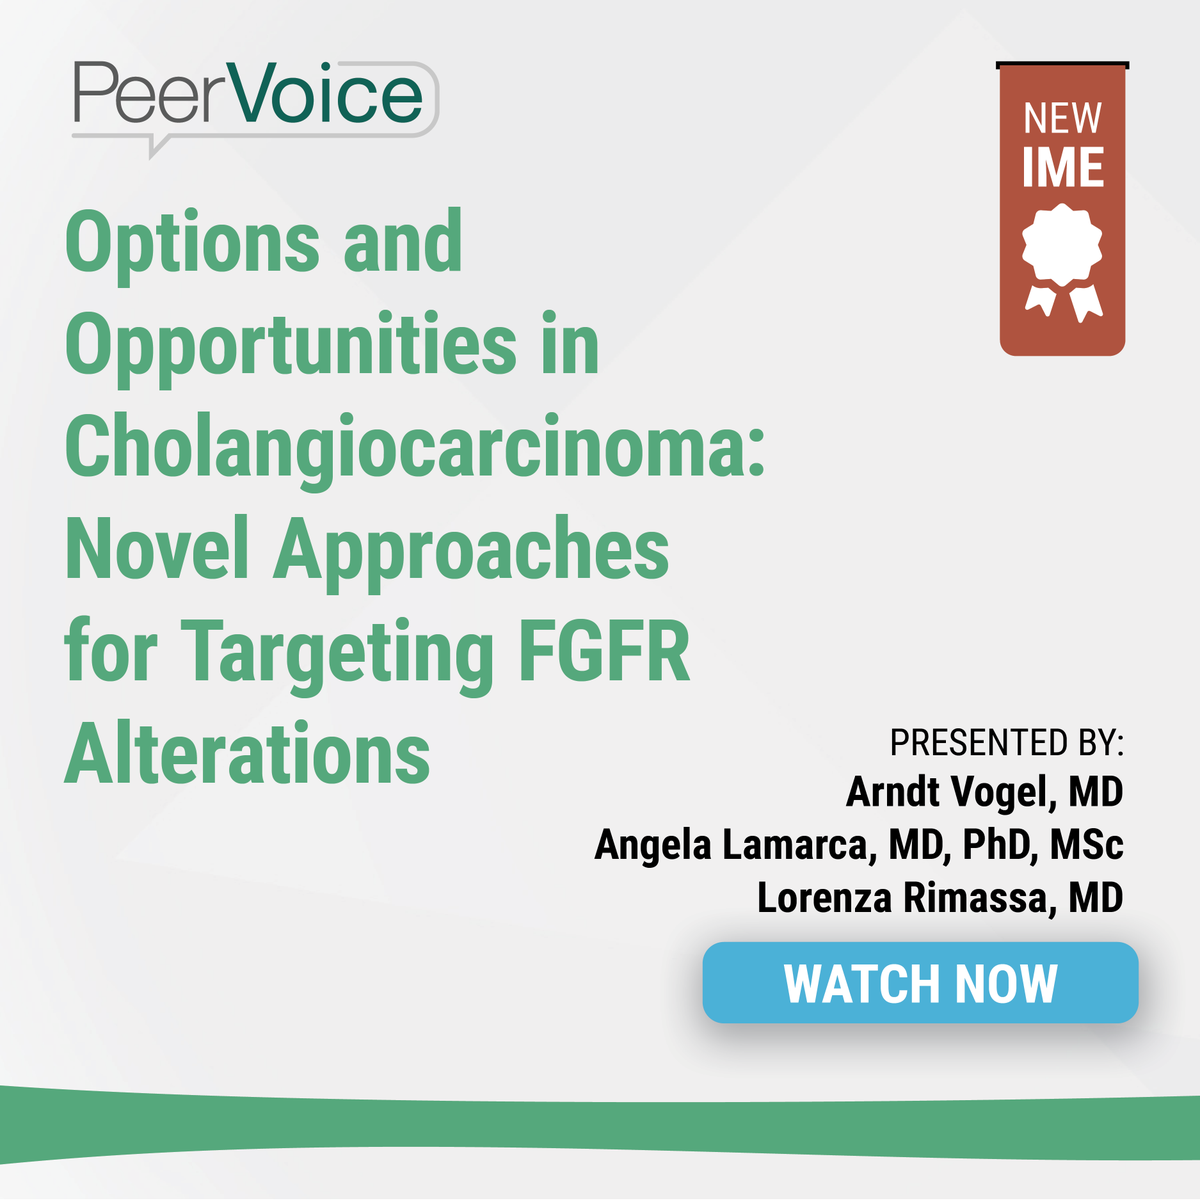 🔥Options & Opportunities in #Cholangiocarcinoma: Novel Approaches for Targeting FGFR Alterations
🧐What Are the Options? Interested?
👉PeerVoice activity by @DrAngelaLamarca @LorenzaRimassa &  @ArndtVogel
👇 ime2.peervoice.com/505204742/5052…
@myESMO @OncoAlert @Easledu @ilca @curecc…